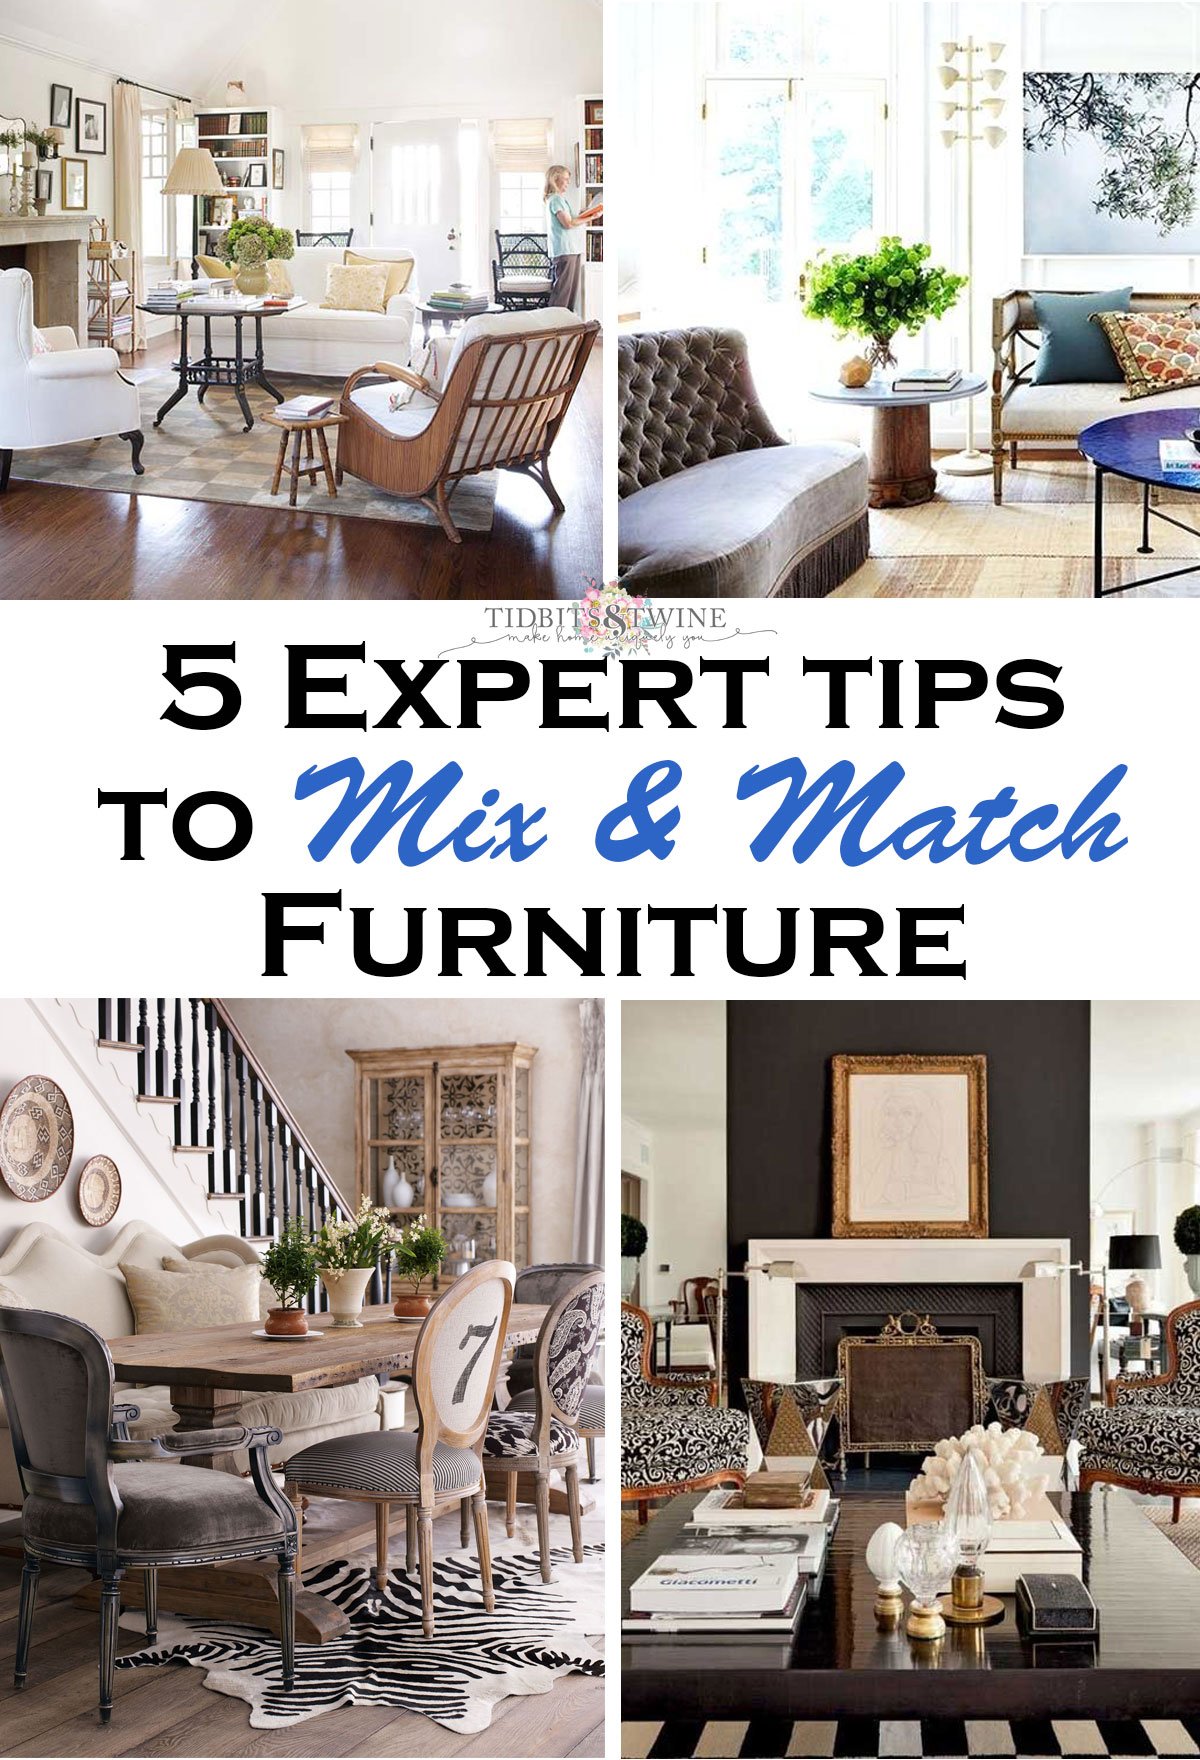 A Guide to Mixing Furniture Styles: 5 Expert Tips